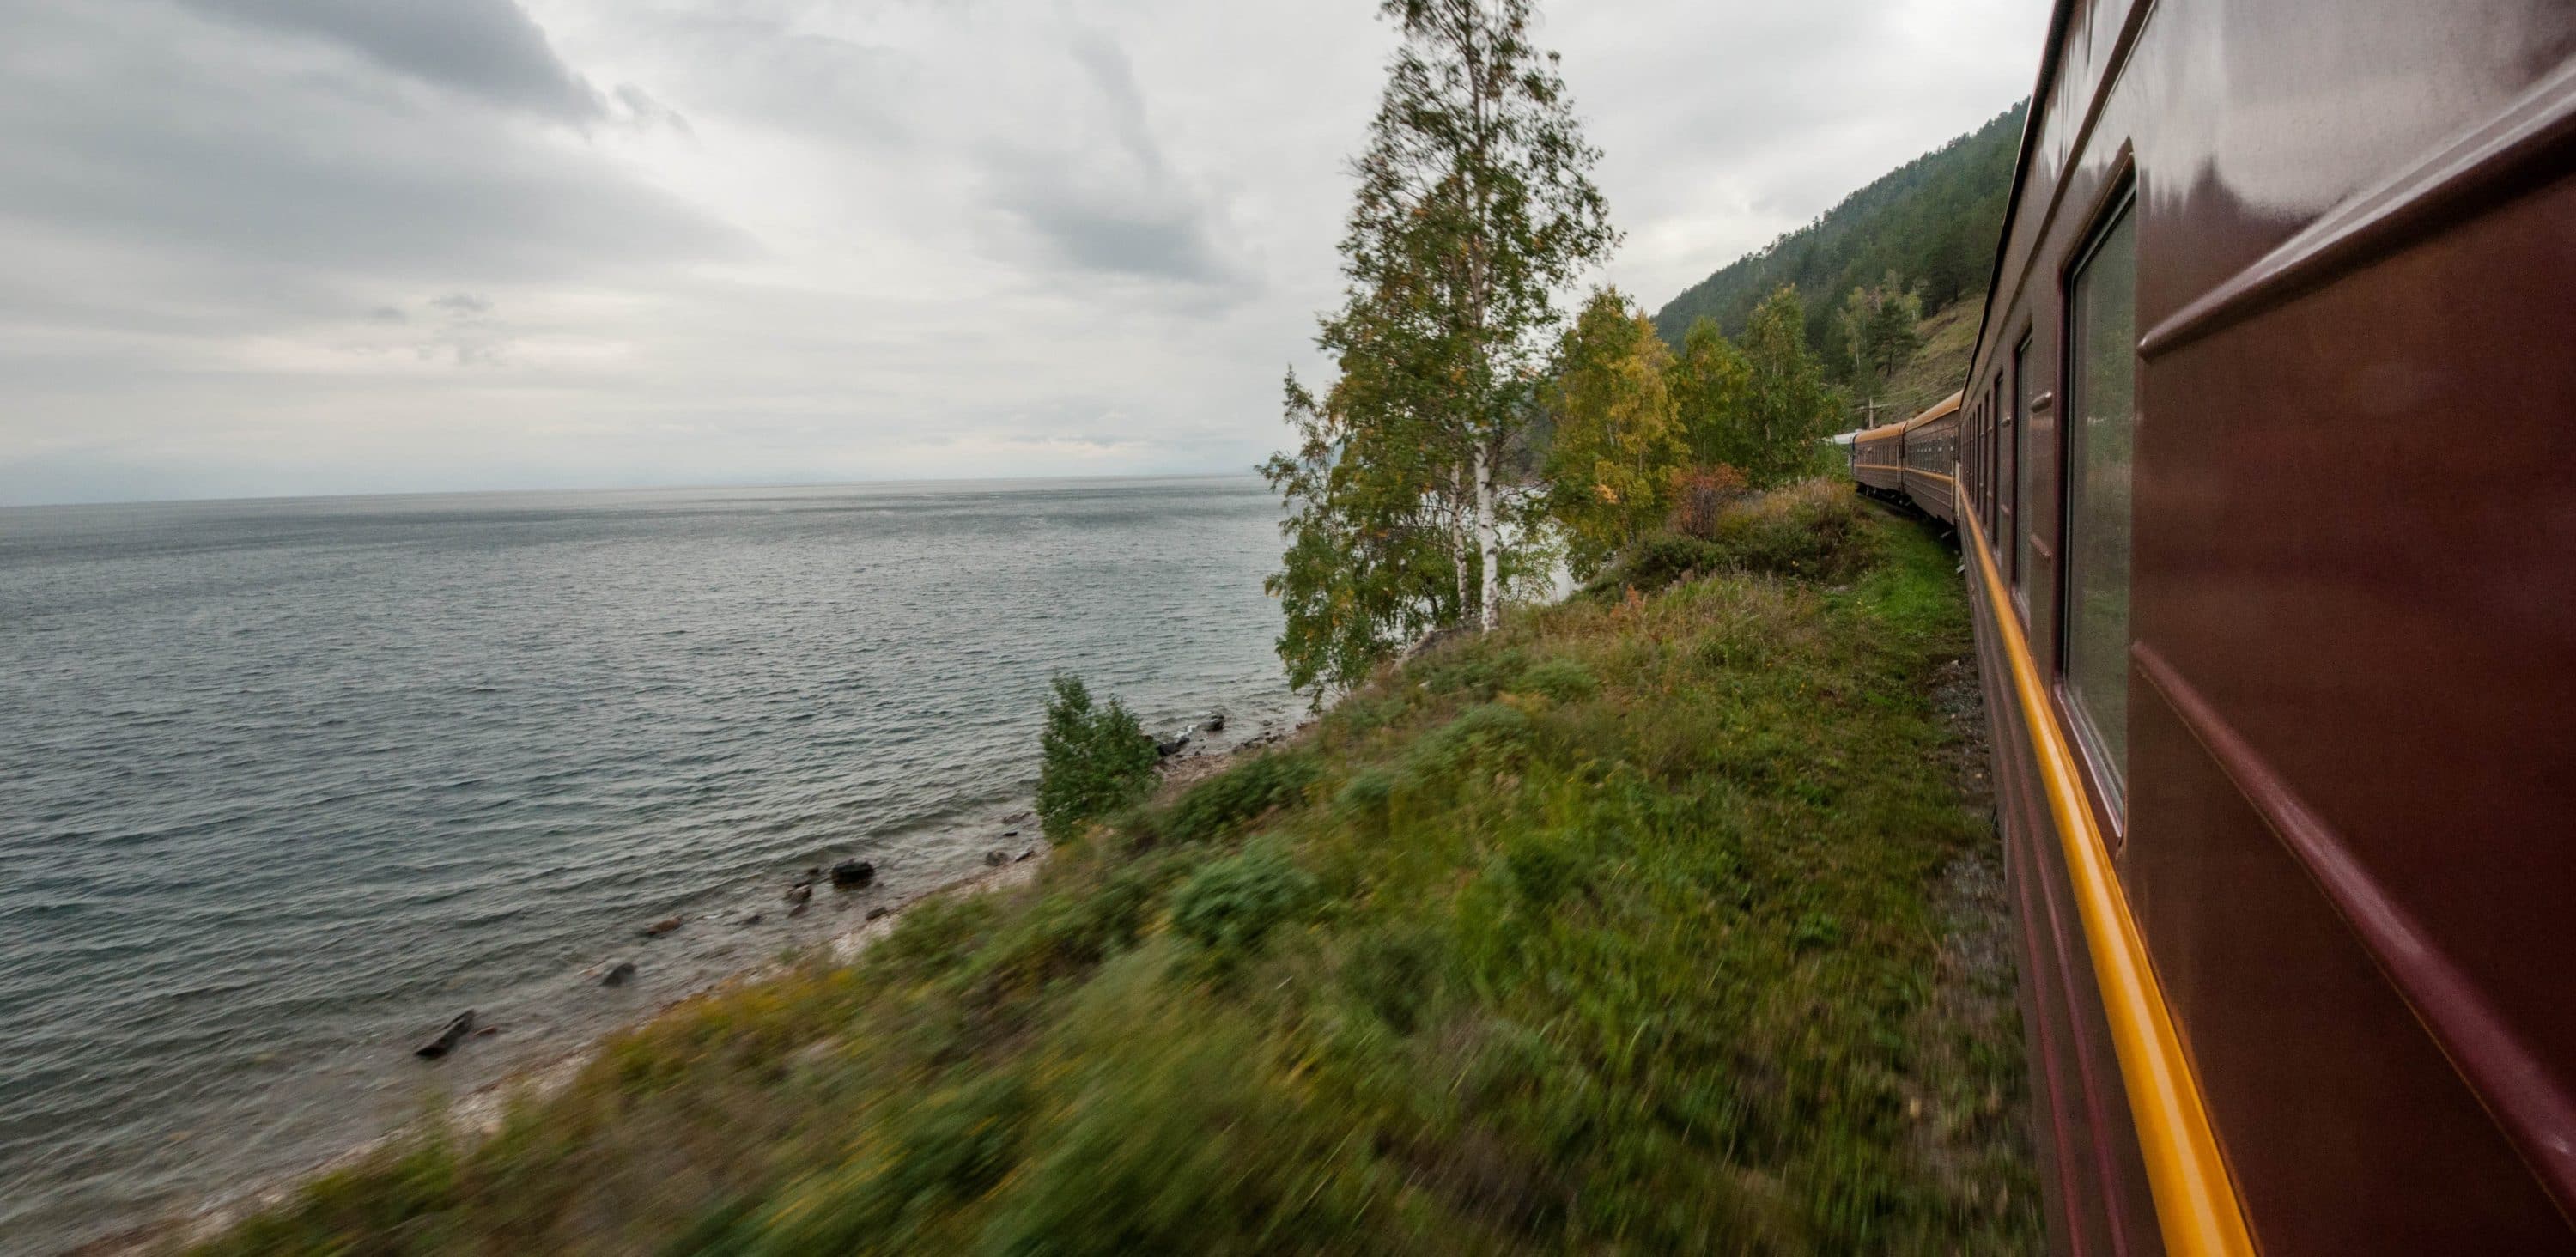 11 Best Tips For Traveling Trans-Siberian Railway Across Russia, Mongolia and China.